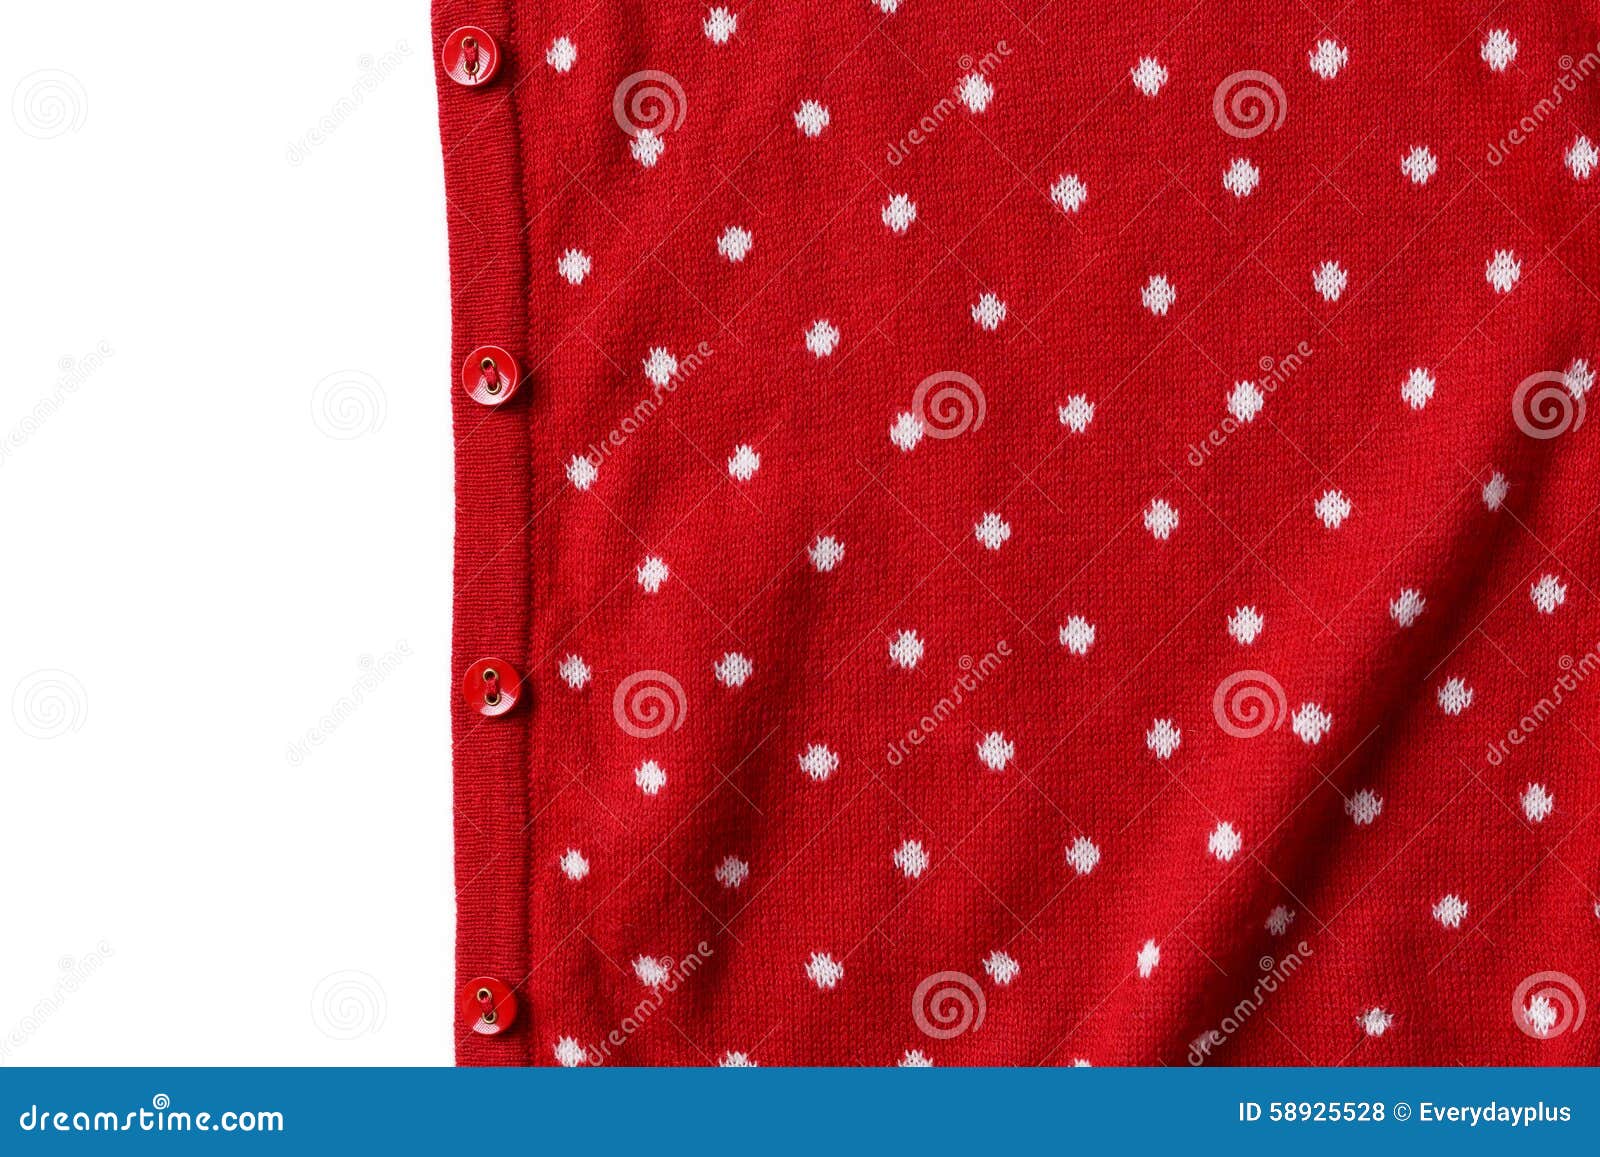 Red Polka Dot Knit Sweater with Button Stock Photo - Image of polka ...